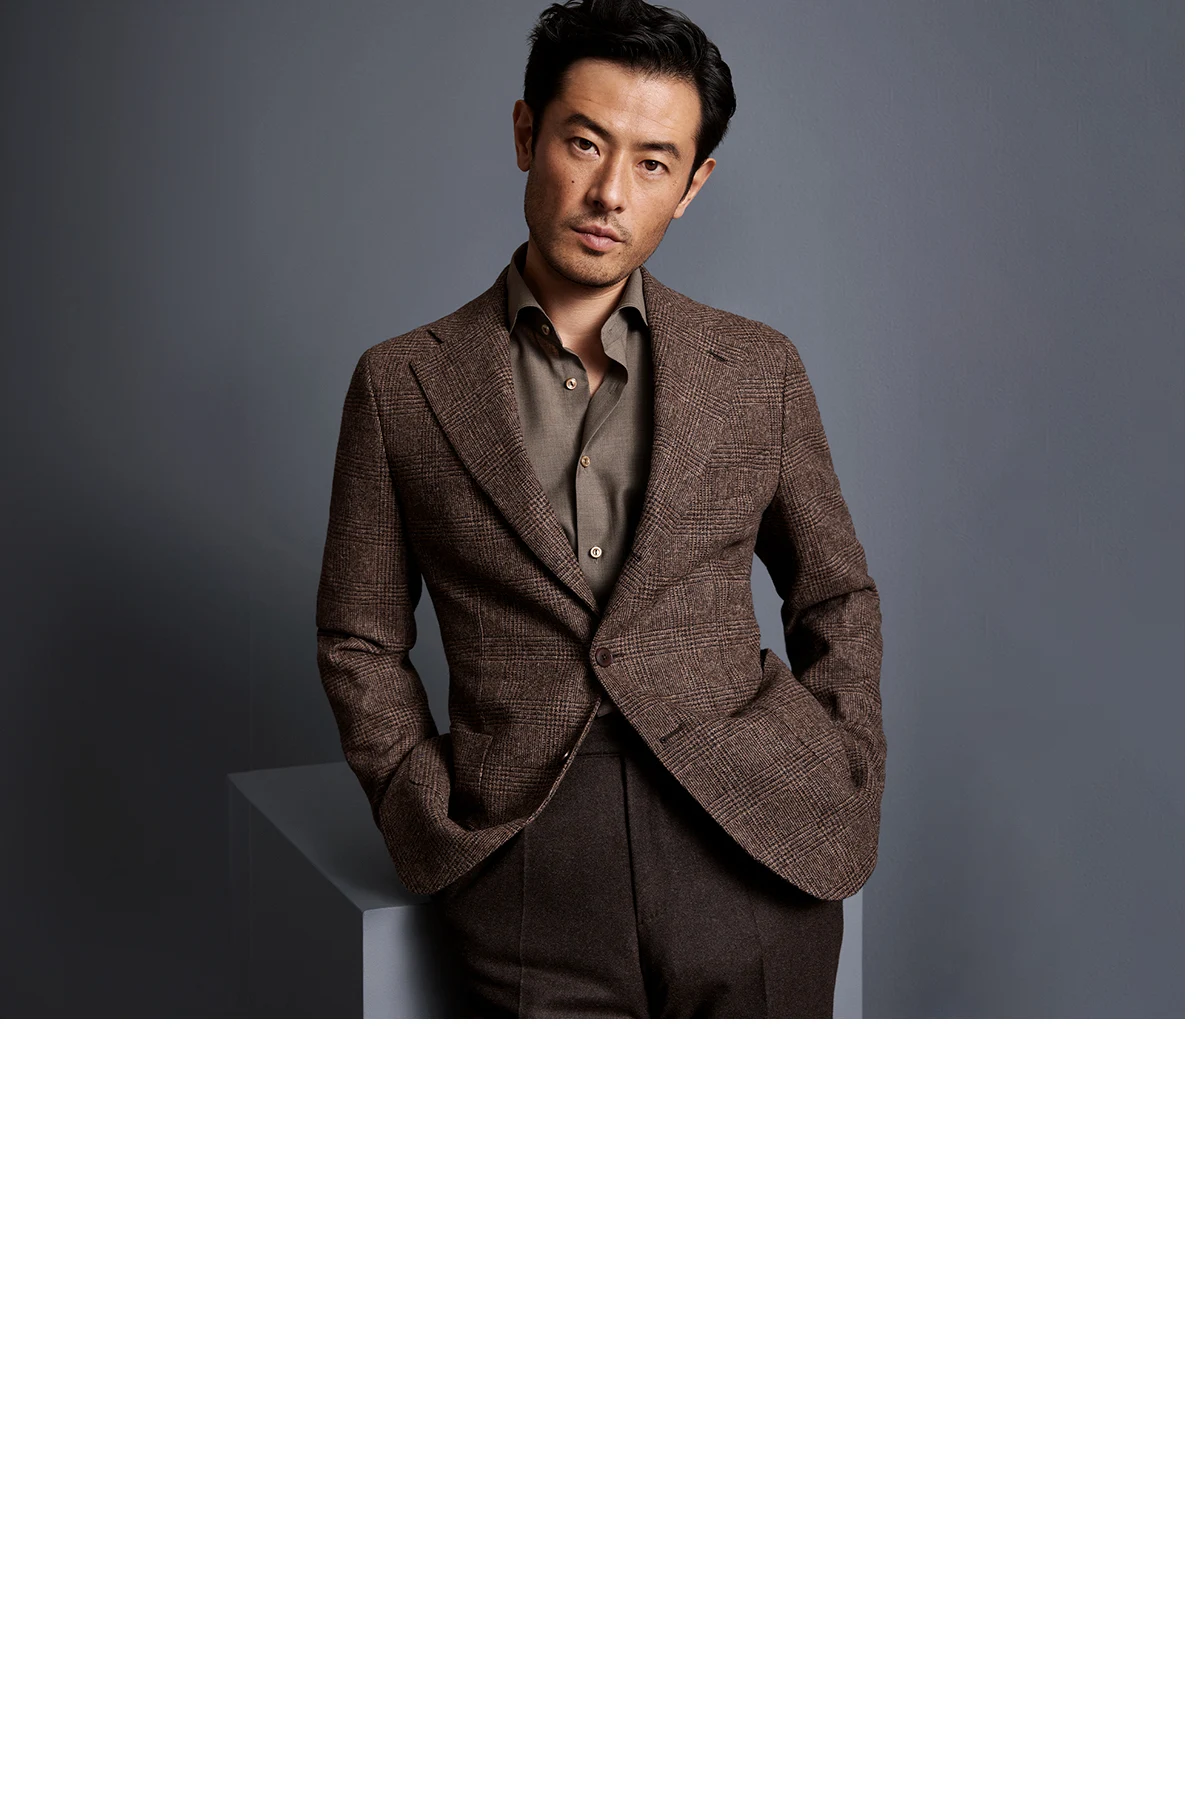 model wearing brown suit and shirt